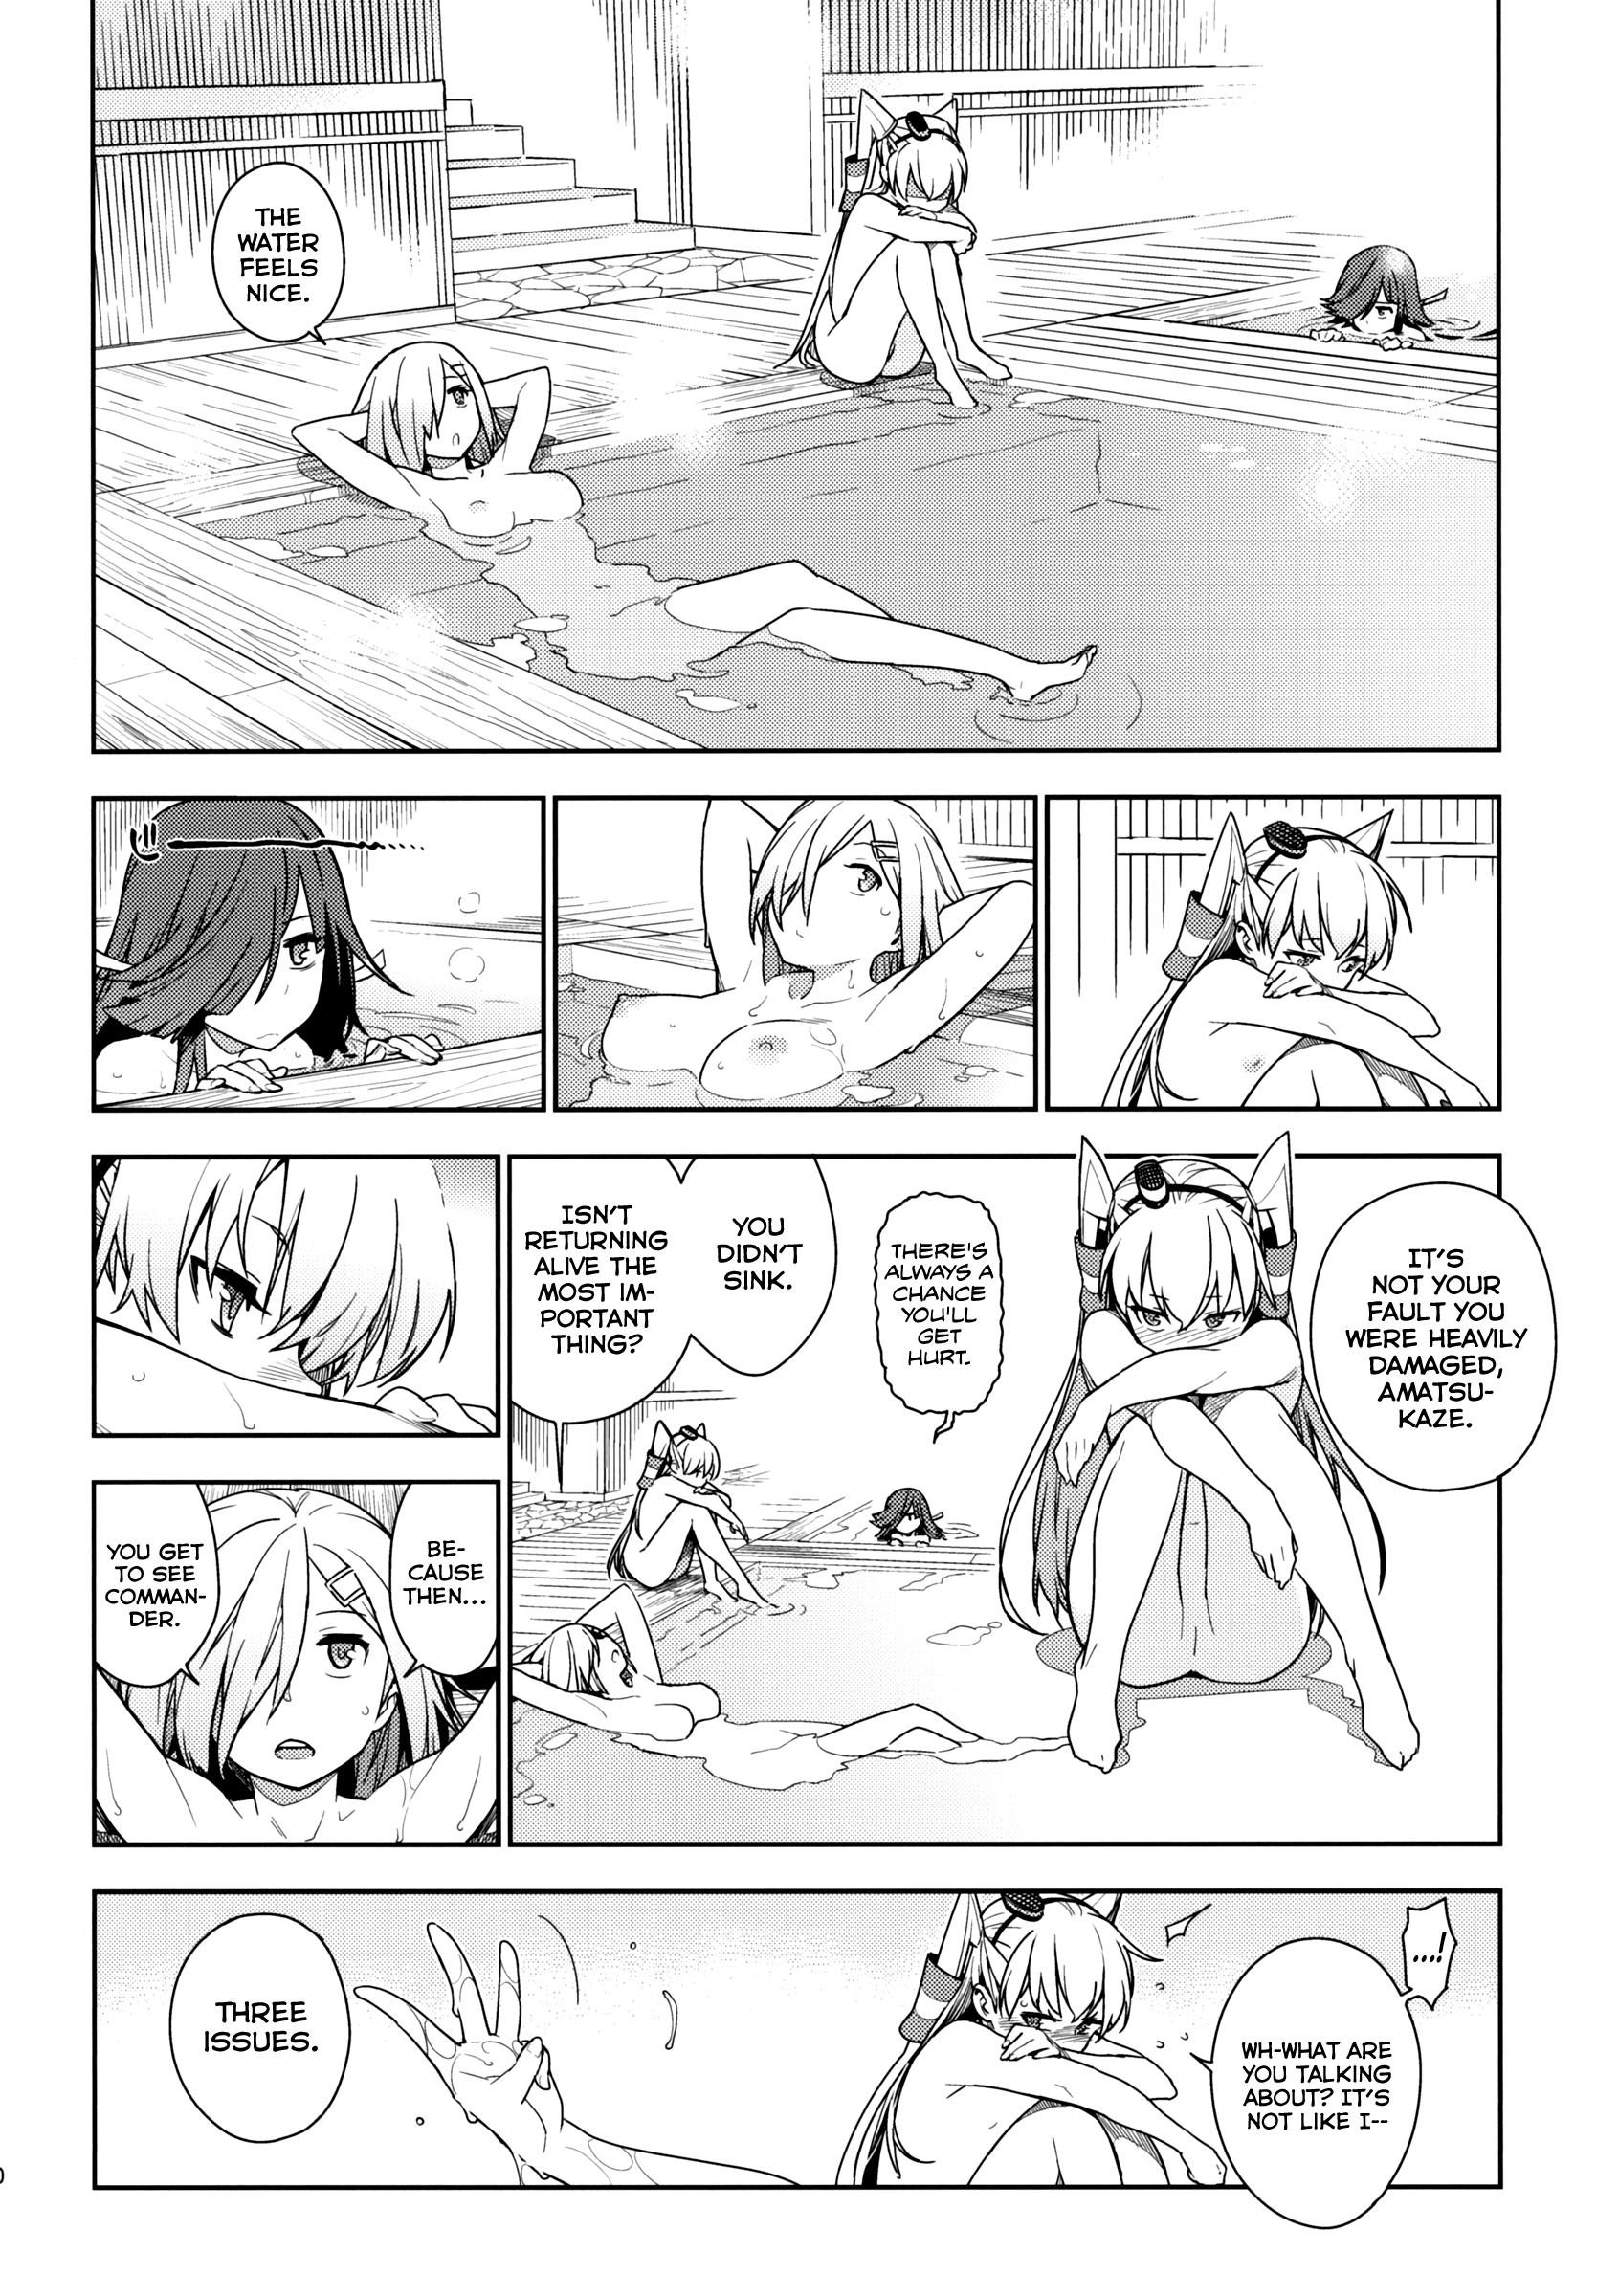 Exhib Little by little - Kantai collection Eurobabe - Page 9